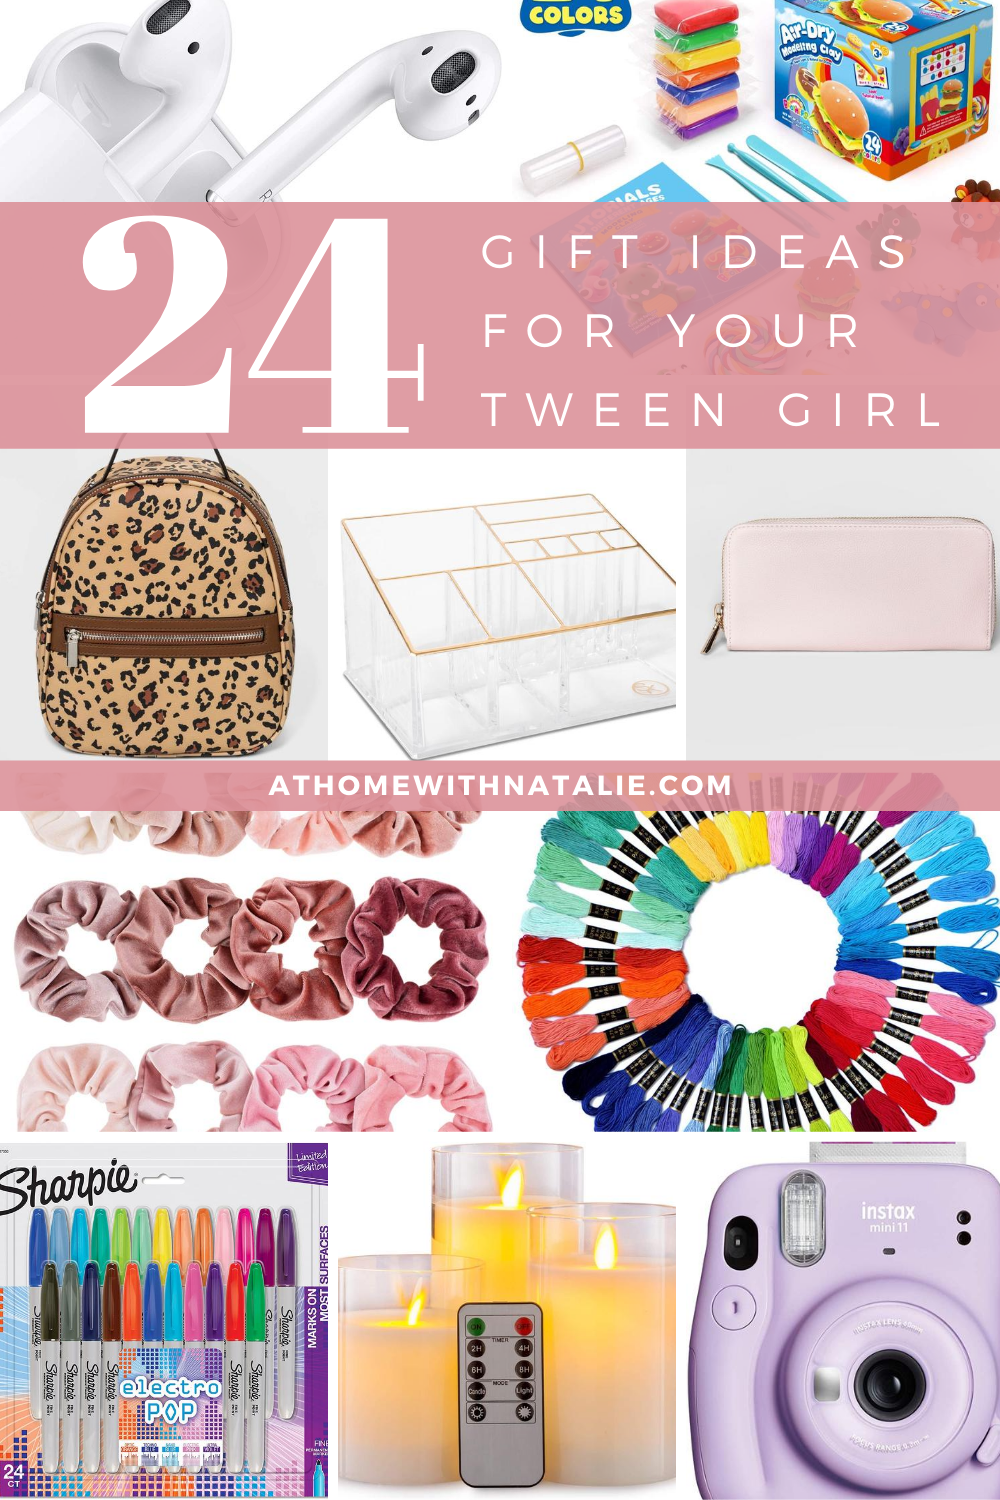 http://www.athomewithnatalie.com/wp-content/uploads/2020/09/athomewithnatalie-tween-girl-gift-guide.png